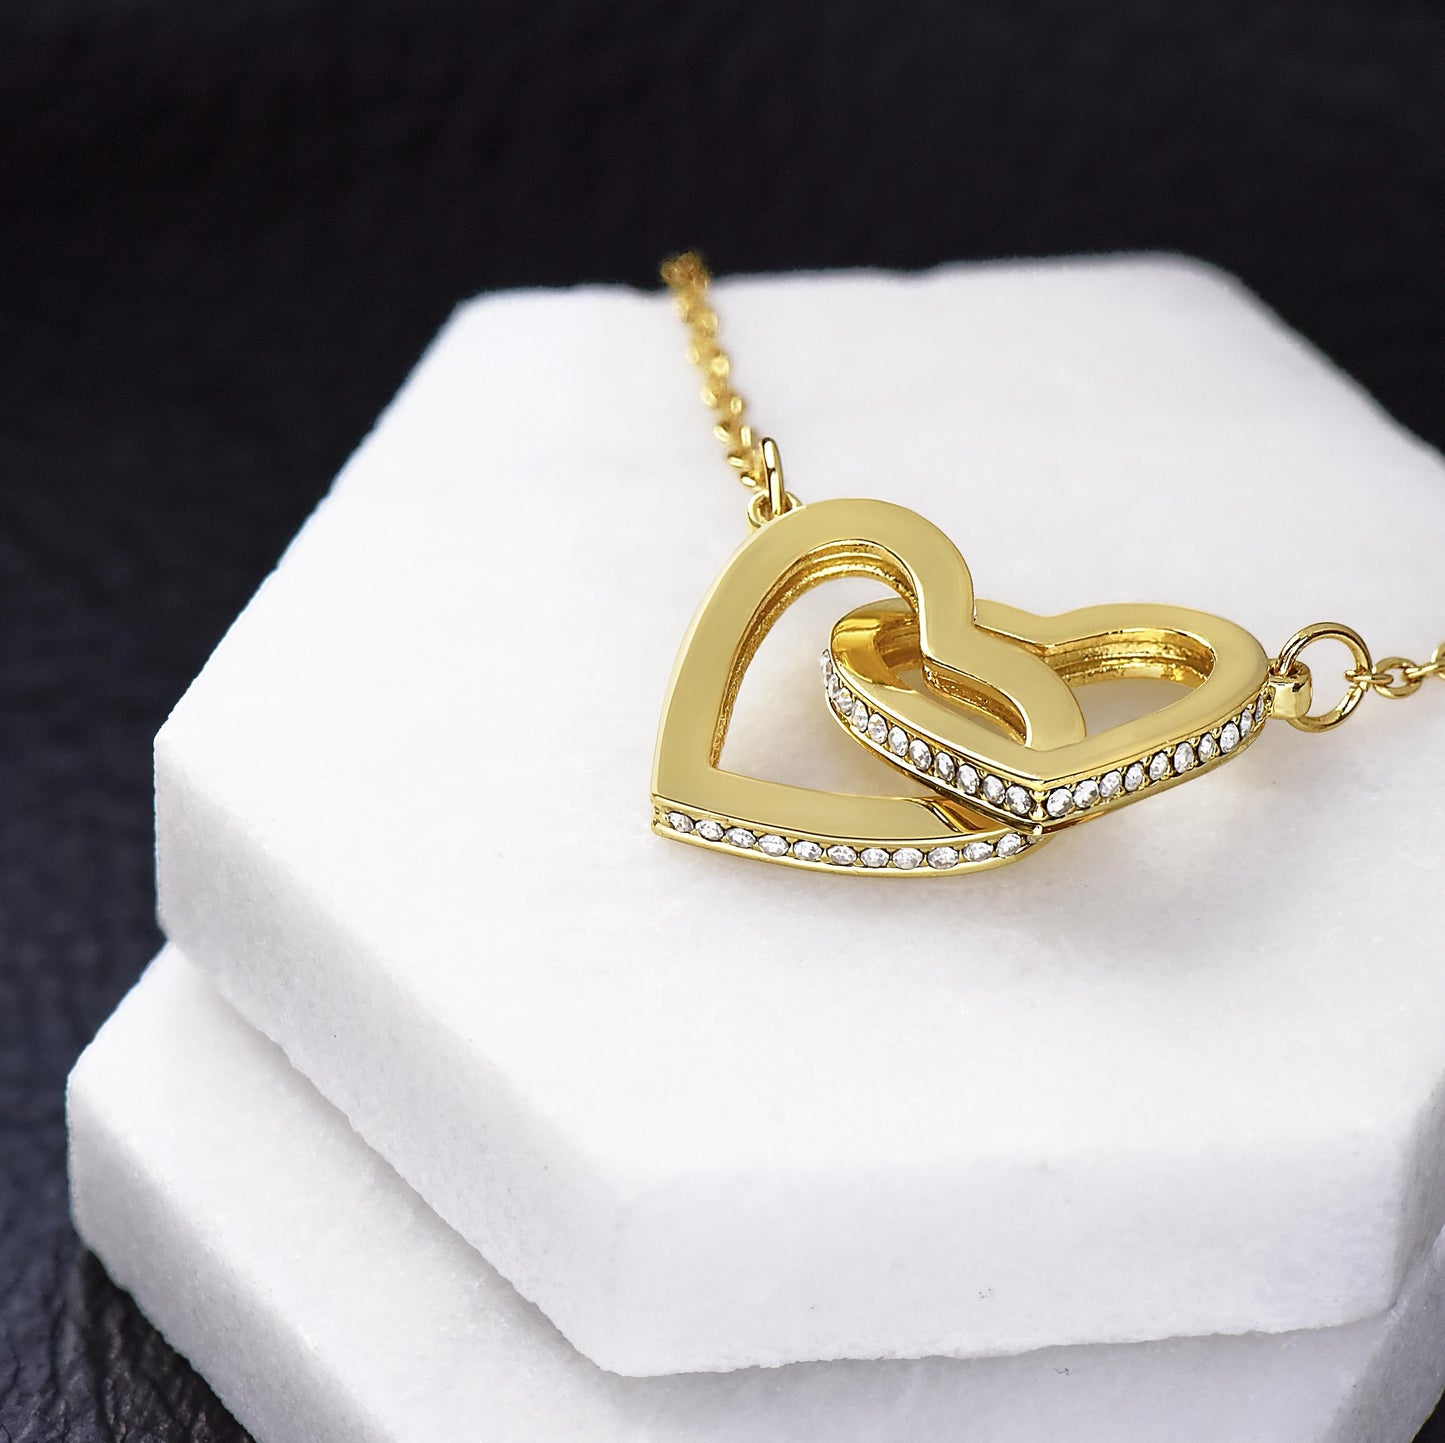 Mother-In-Law Necklace, To The Best Mother In Law Œwarm Heart-Pb” Interlocking Hearts Necklace Gift